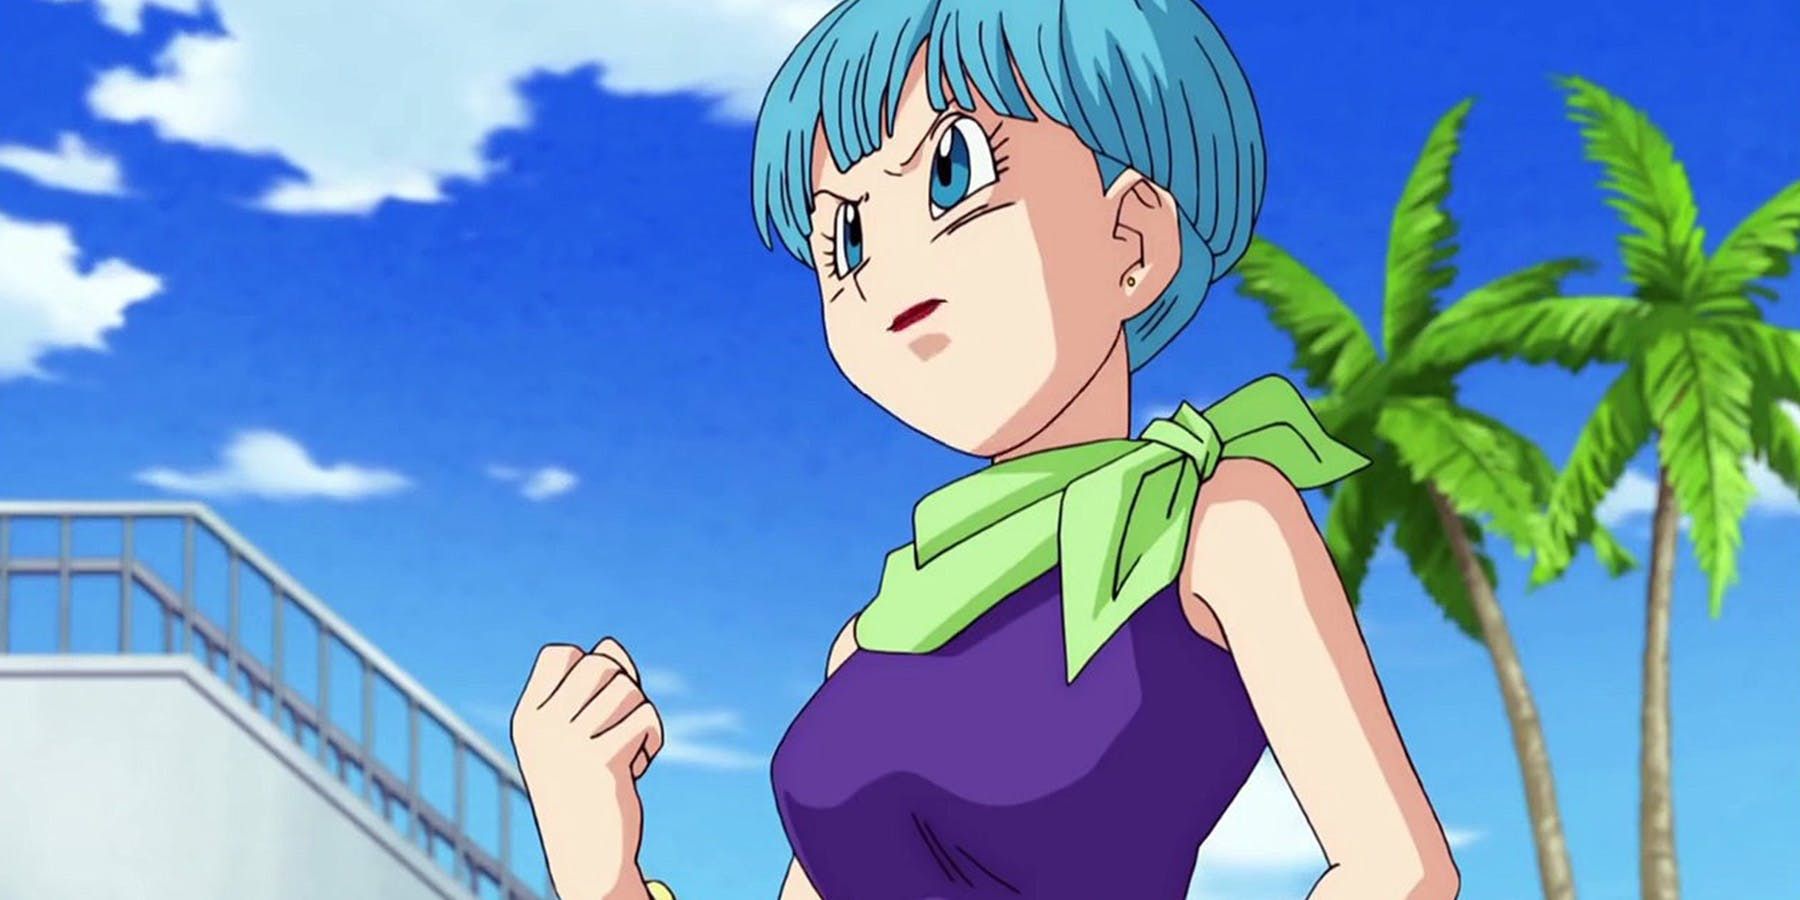 Bulma frowning and clenching her fist in Dragon Ball Z.